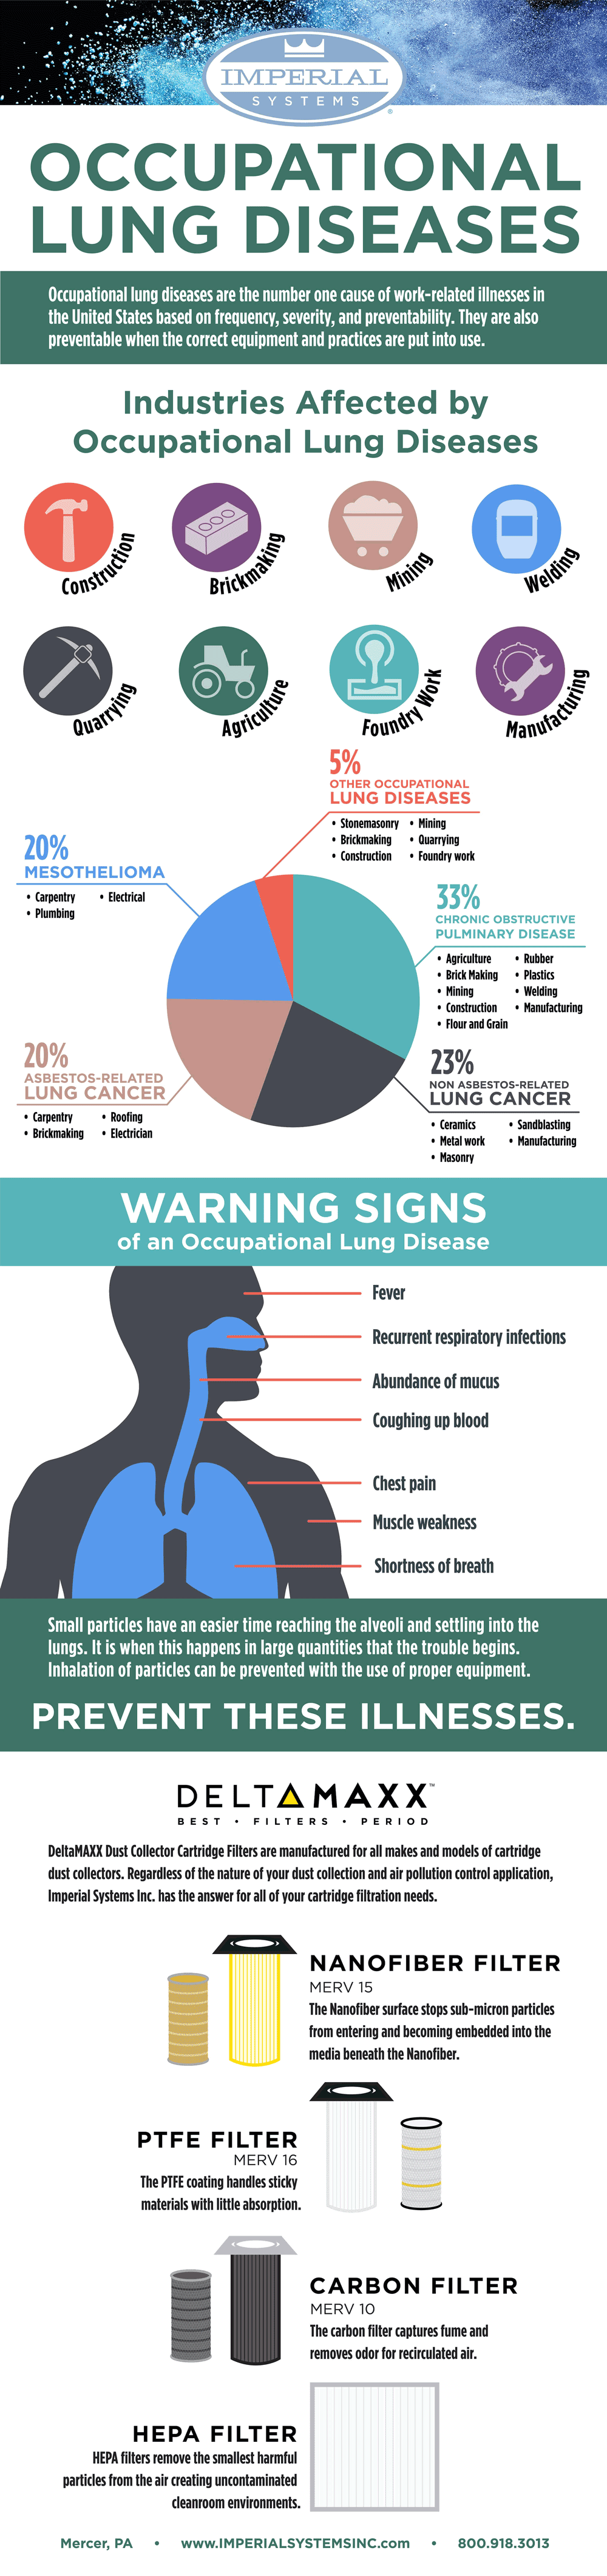 Infographic of Occupational Lung Diseases, warning signs, and how an Imperial Systems dust collector can help save your life